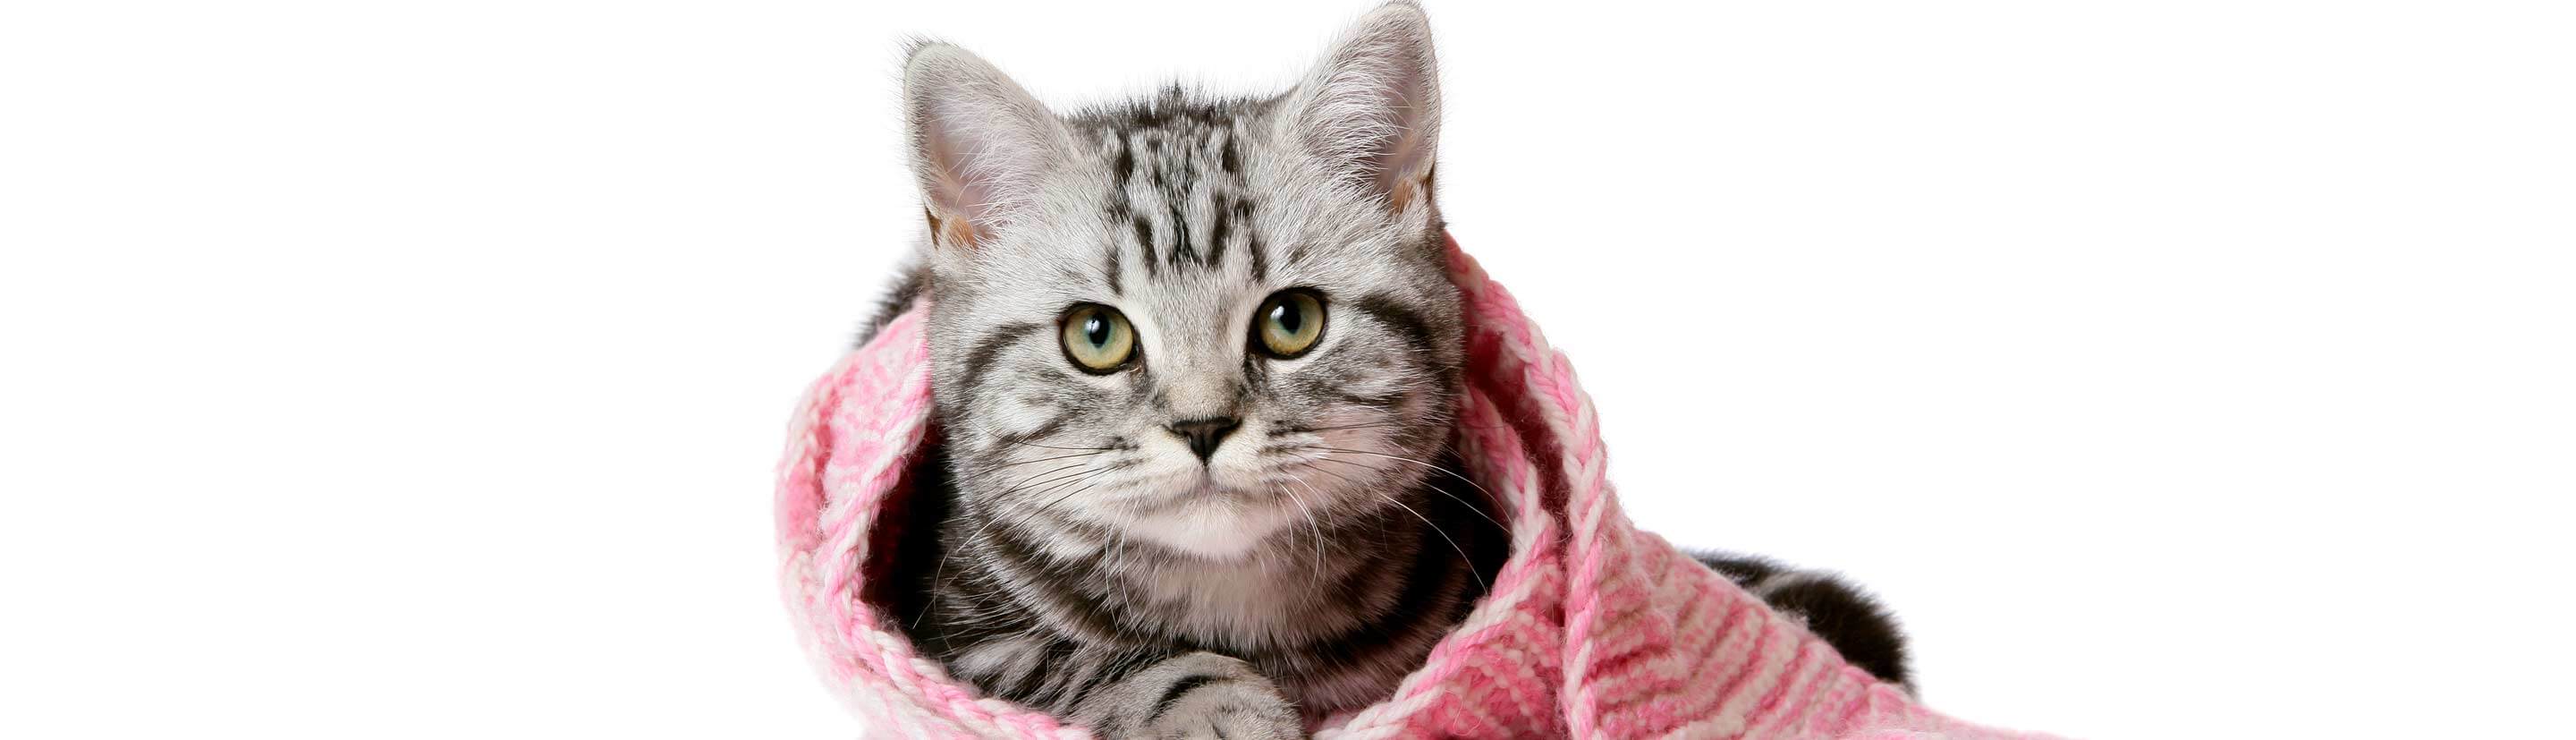 Gray Kitten Wrapped in Pink Knitted Blanket